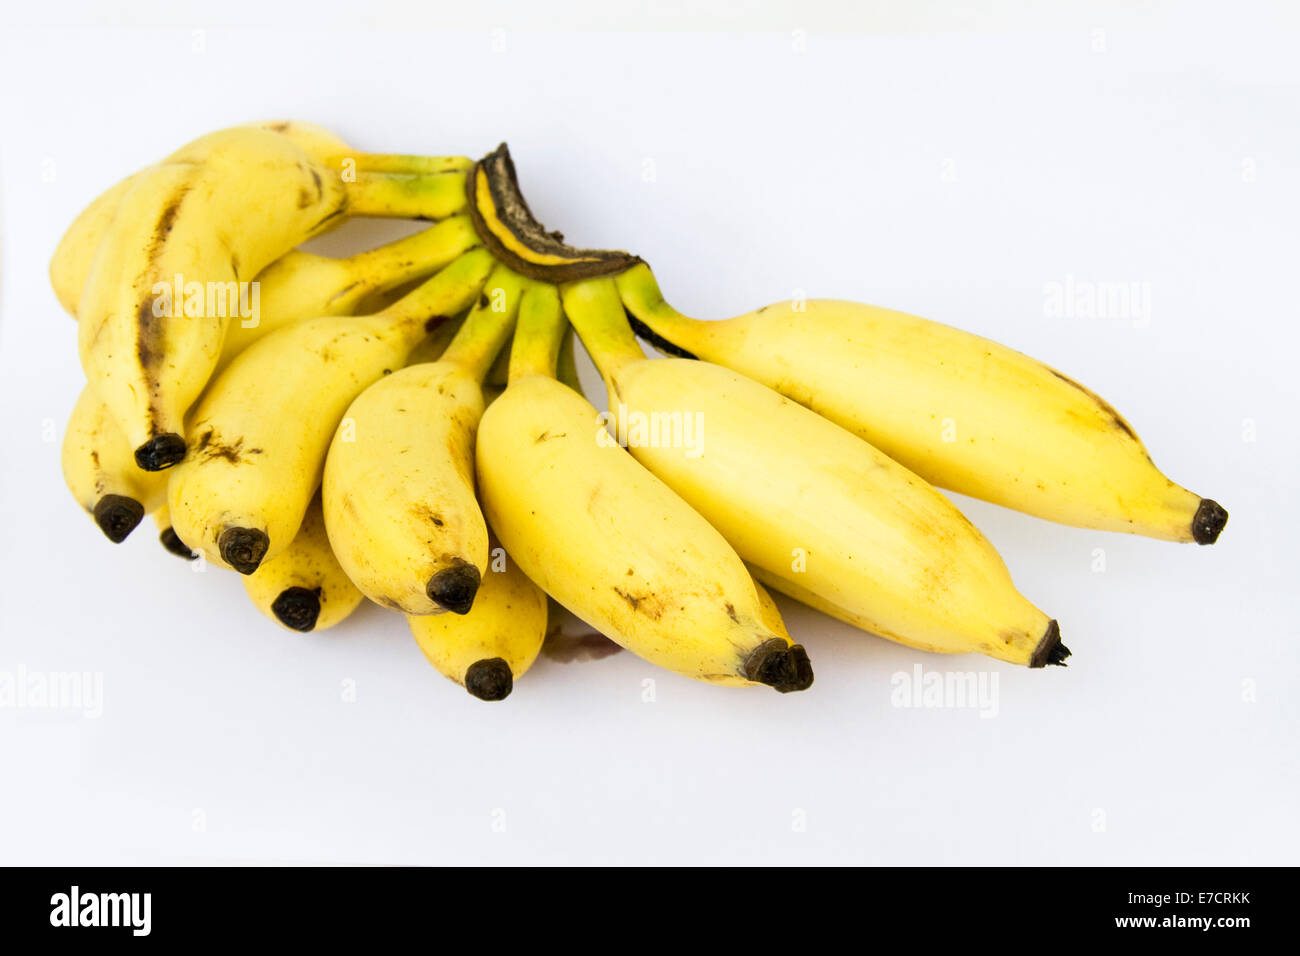 Bunch of gold colored tasty and healthful banana fruits, isolated on white Stock Photo